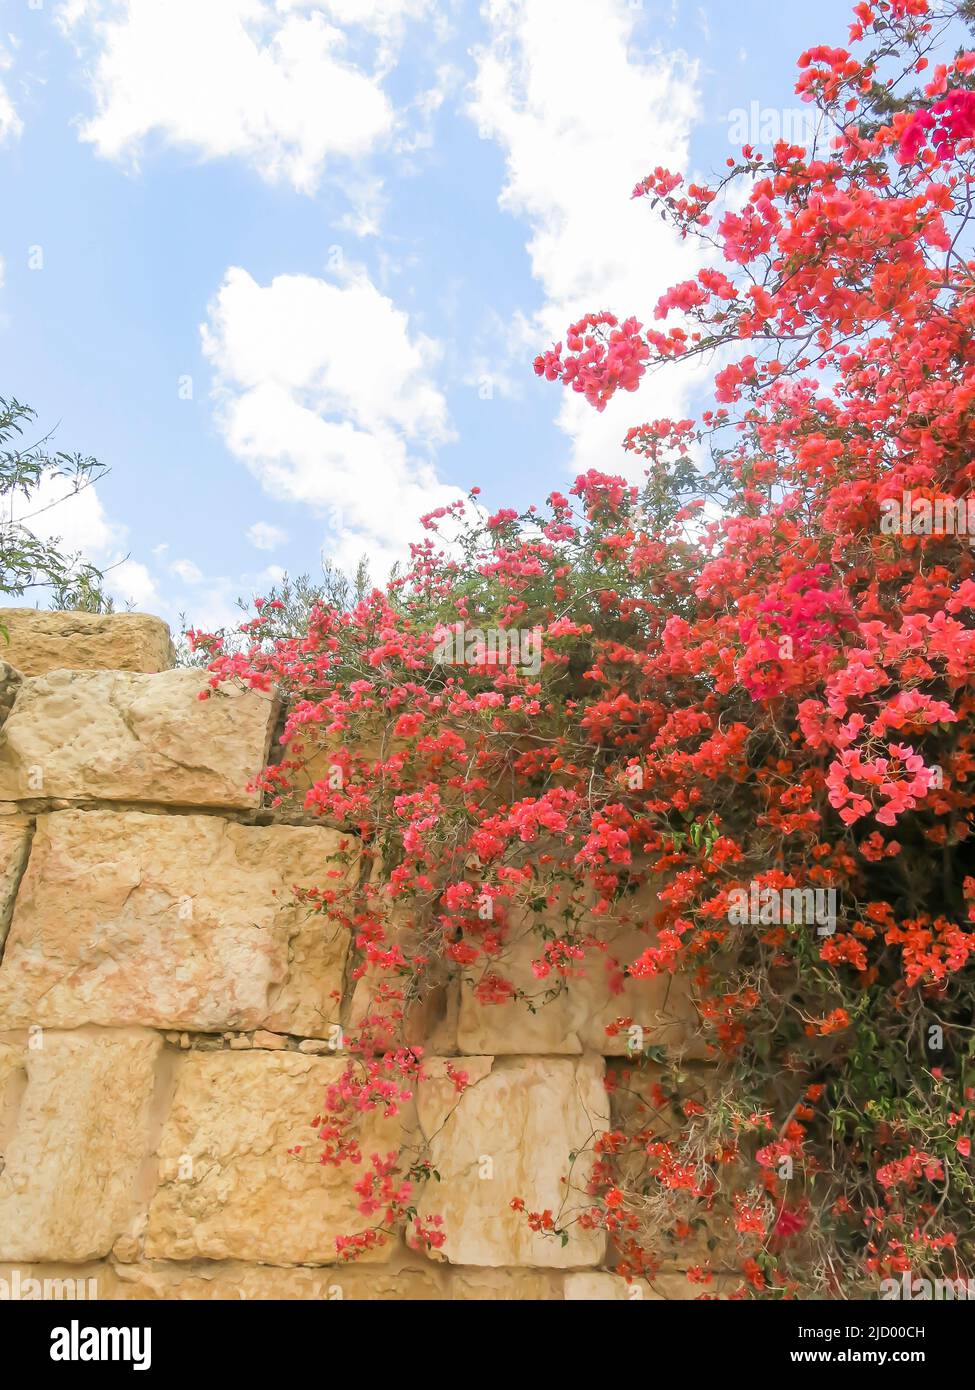 Bougainvillea Growing Against Ancient Wall at the Ruins of Sbeitia, Tunisia Stock Photo